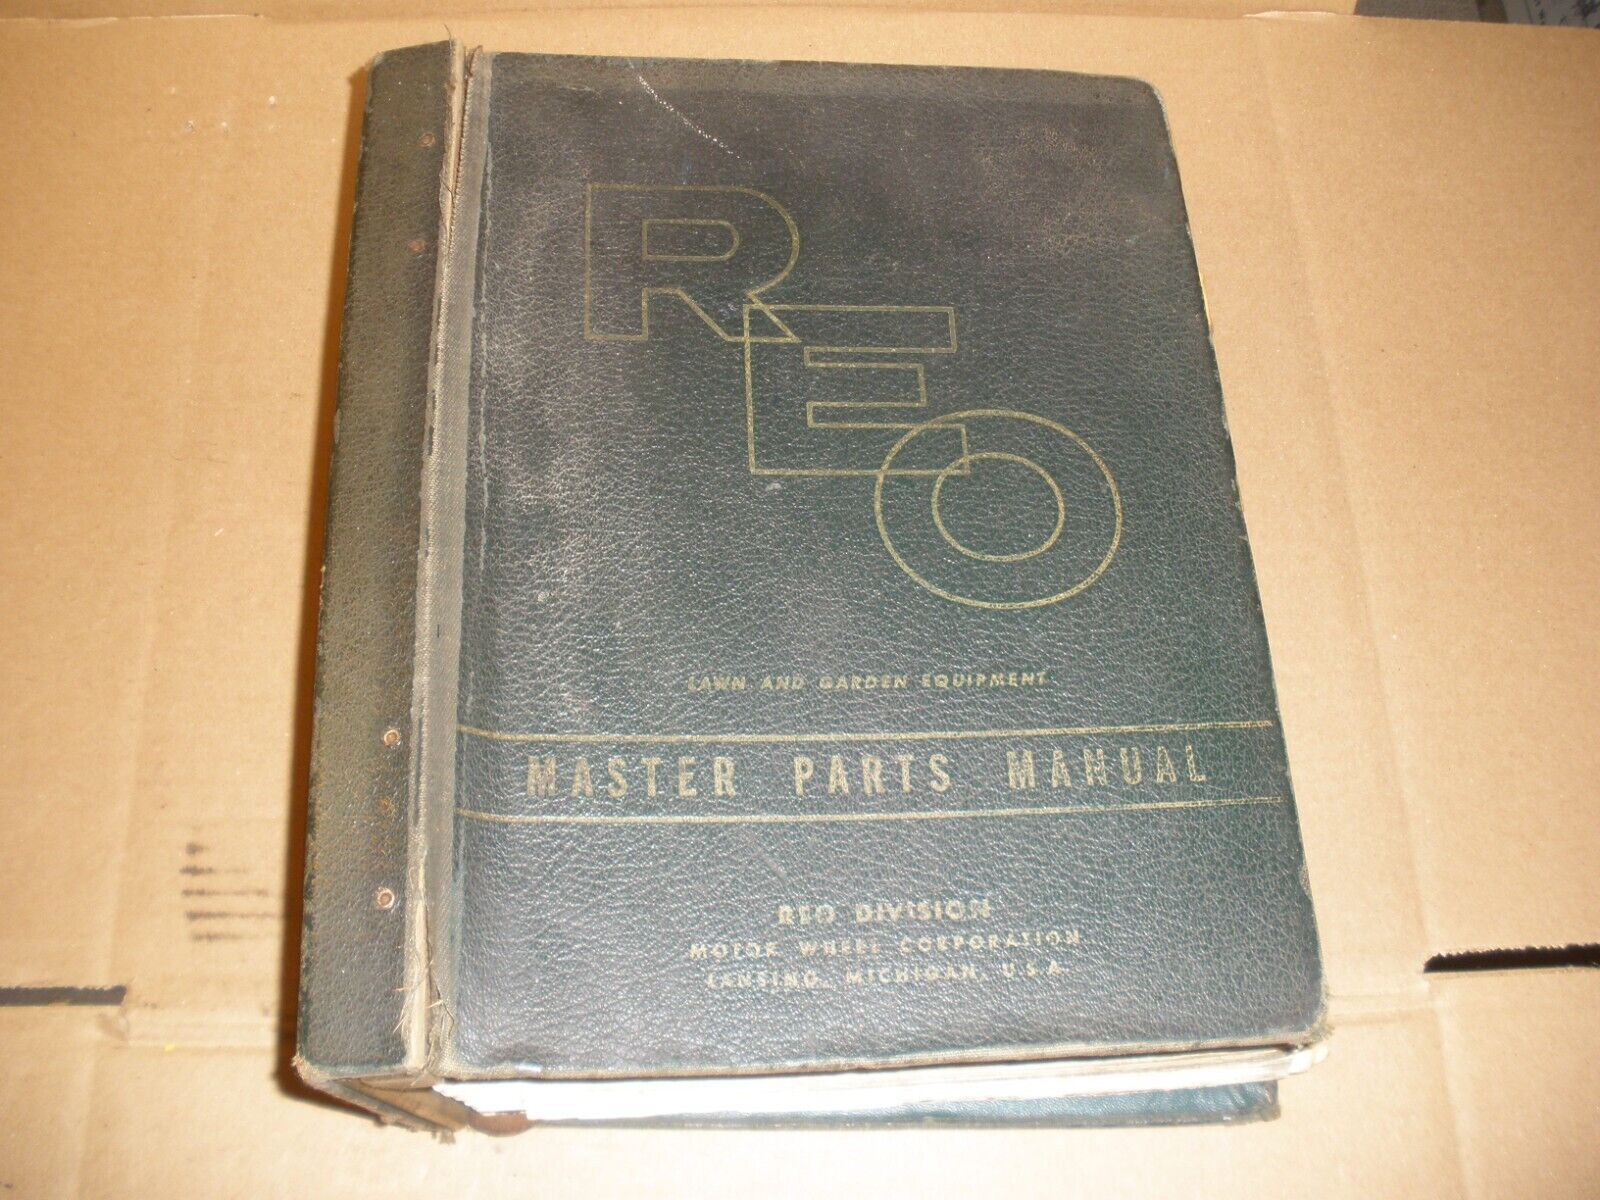 Vintage 1950's REO Reel & Rotary Lawn Mower Illustrated Parts List Book Diagrams